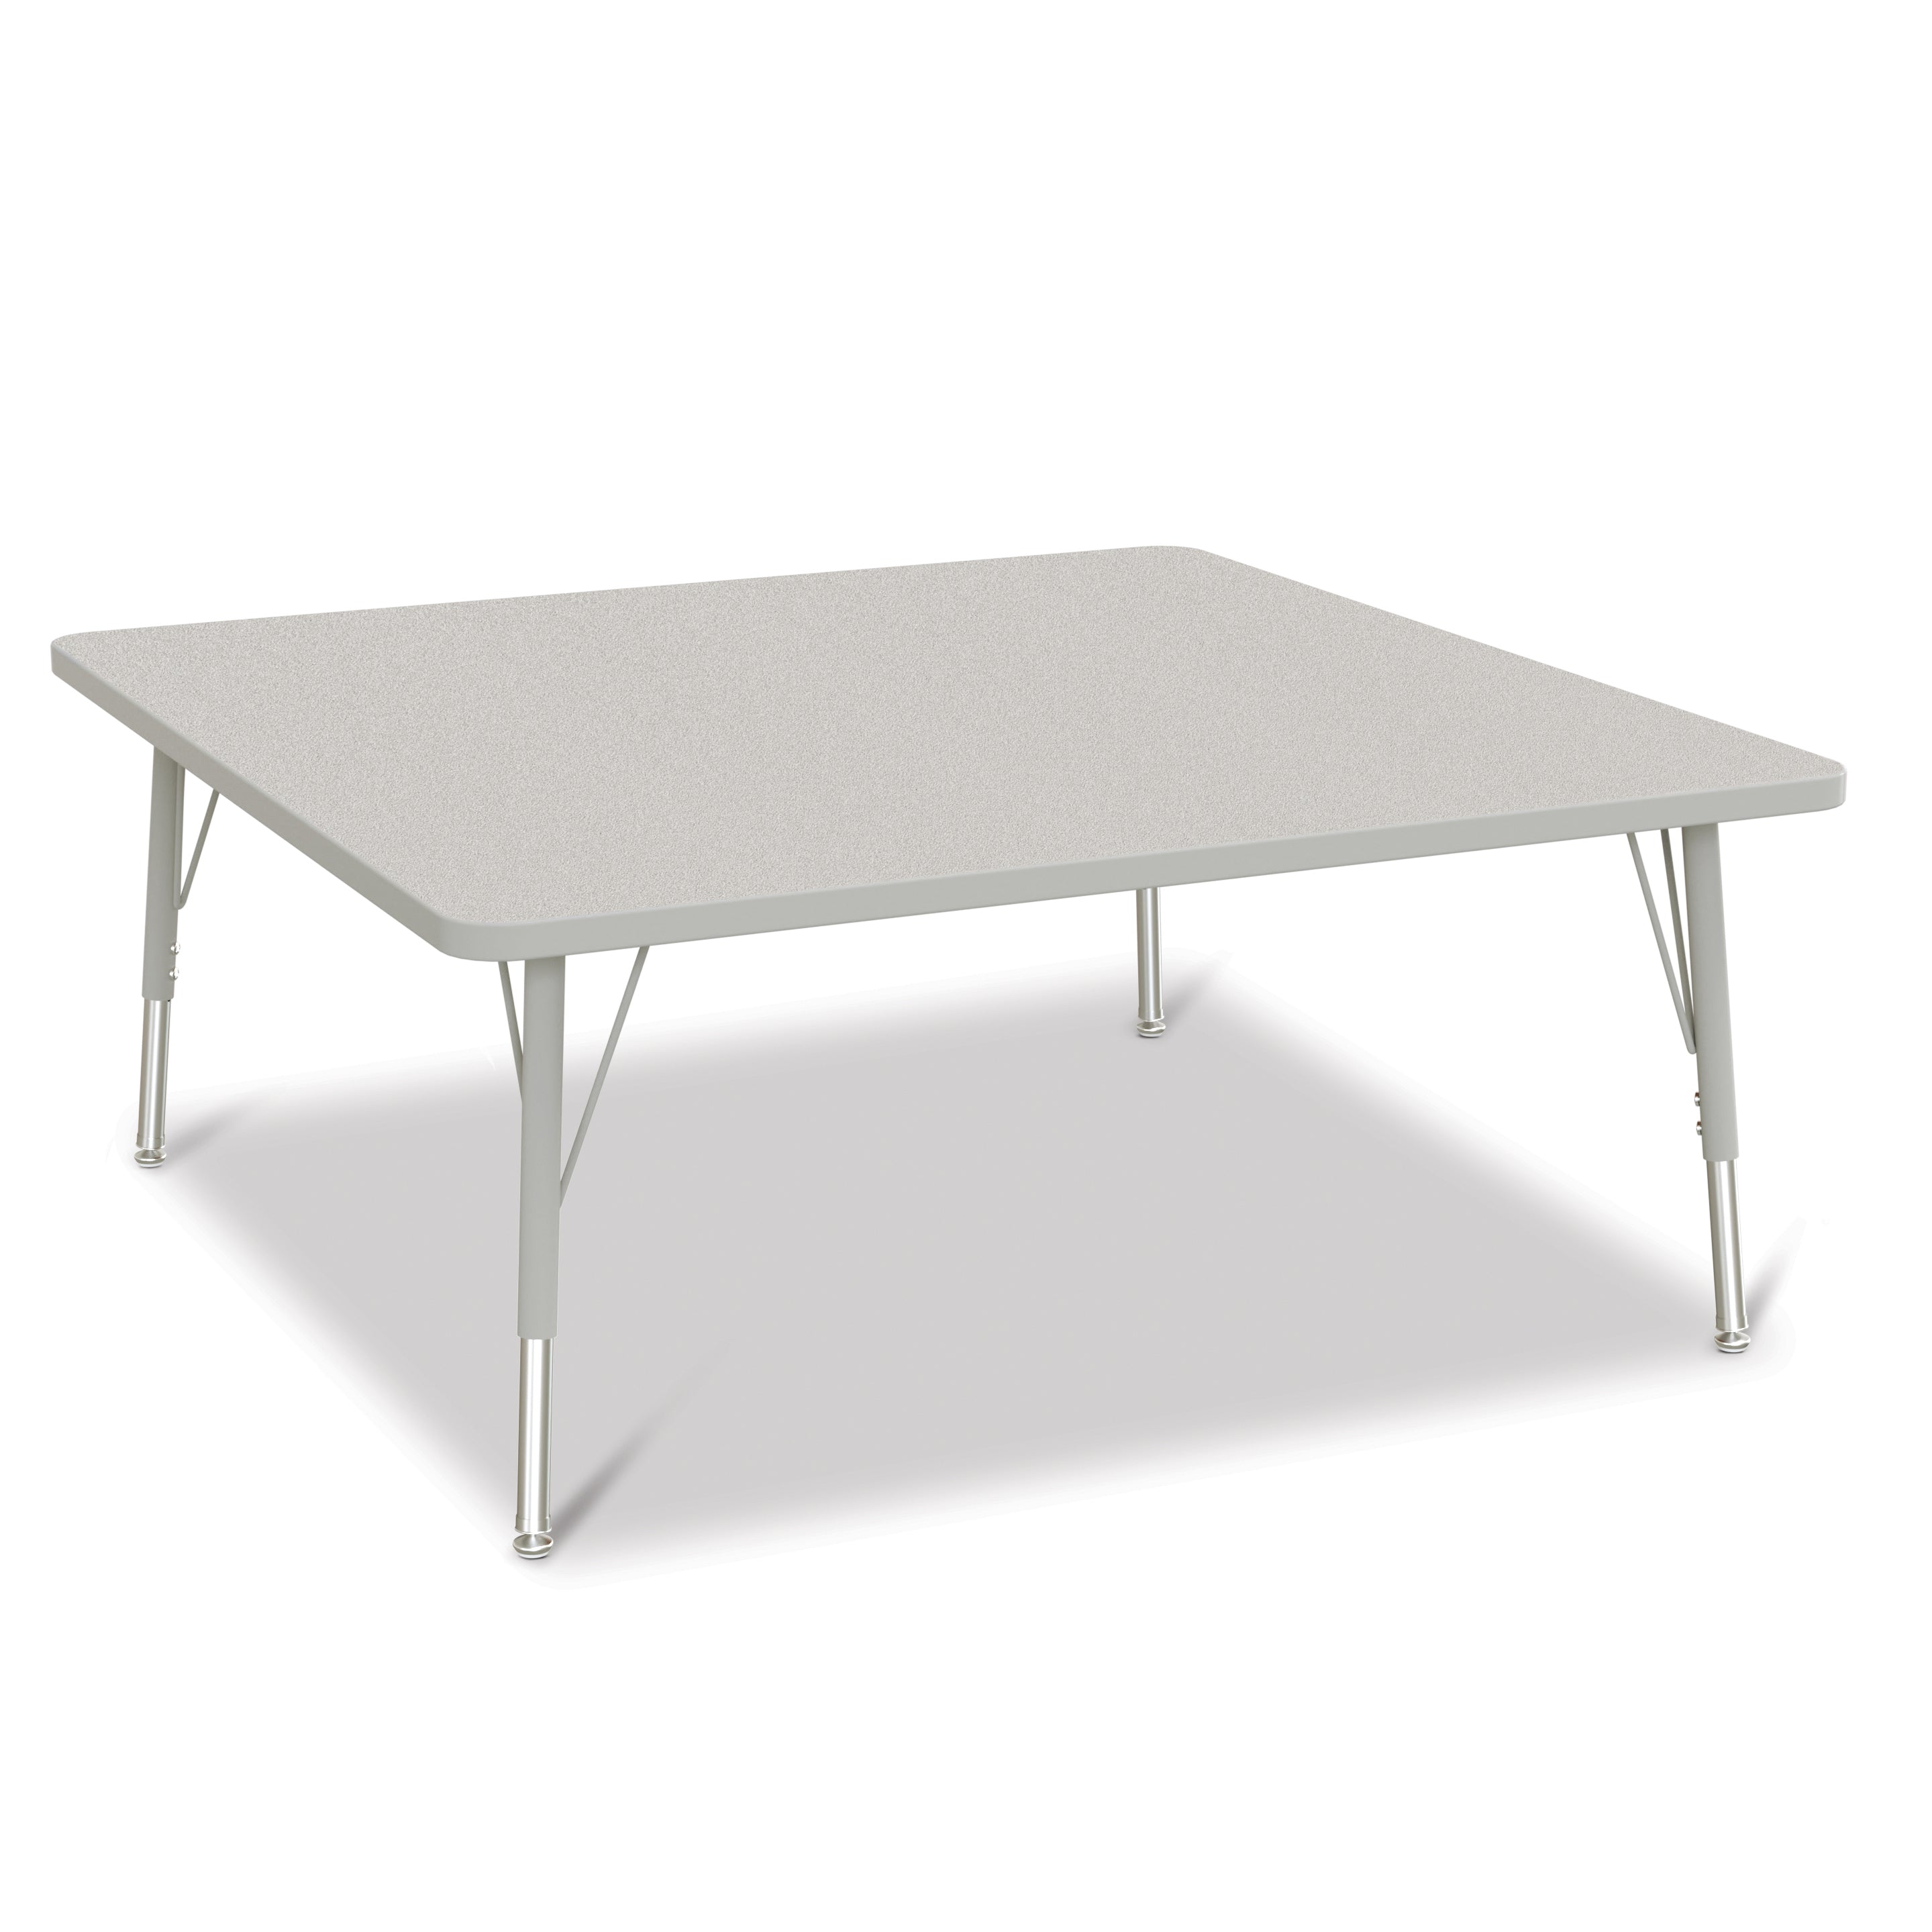 6418JCE000, Berries Square Activity Table - 48" X 48", E-height - Freckled Gray/Gray/Gray